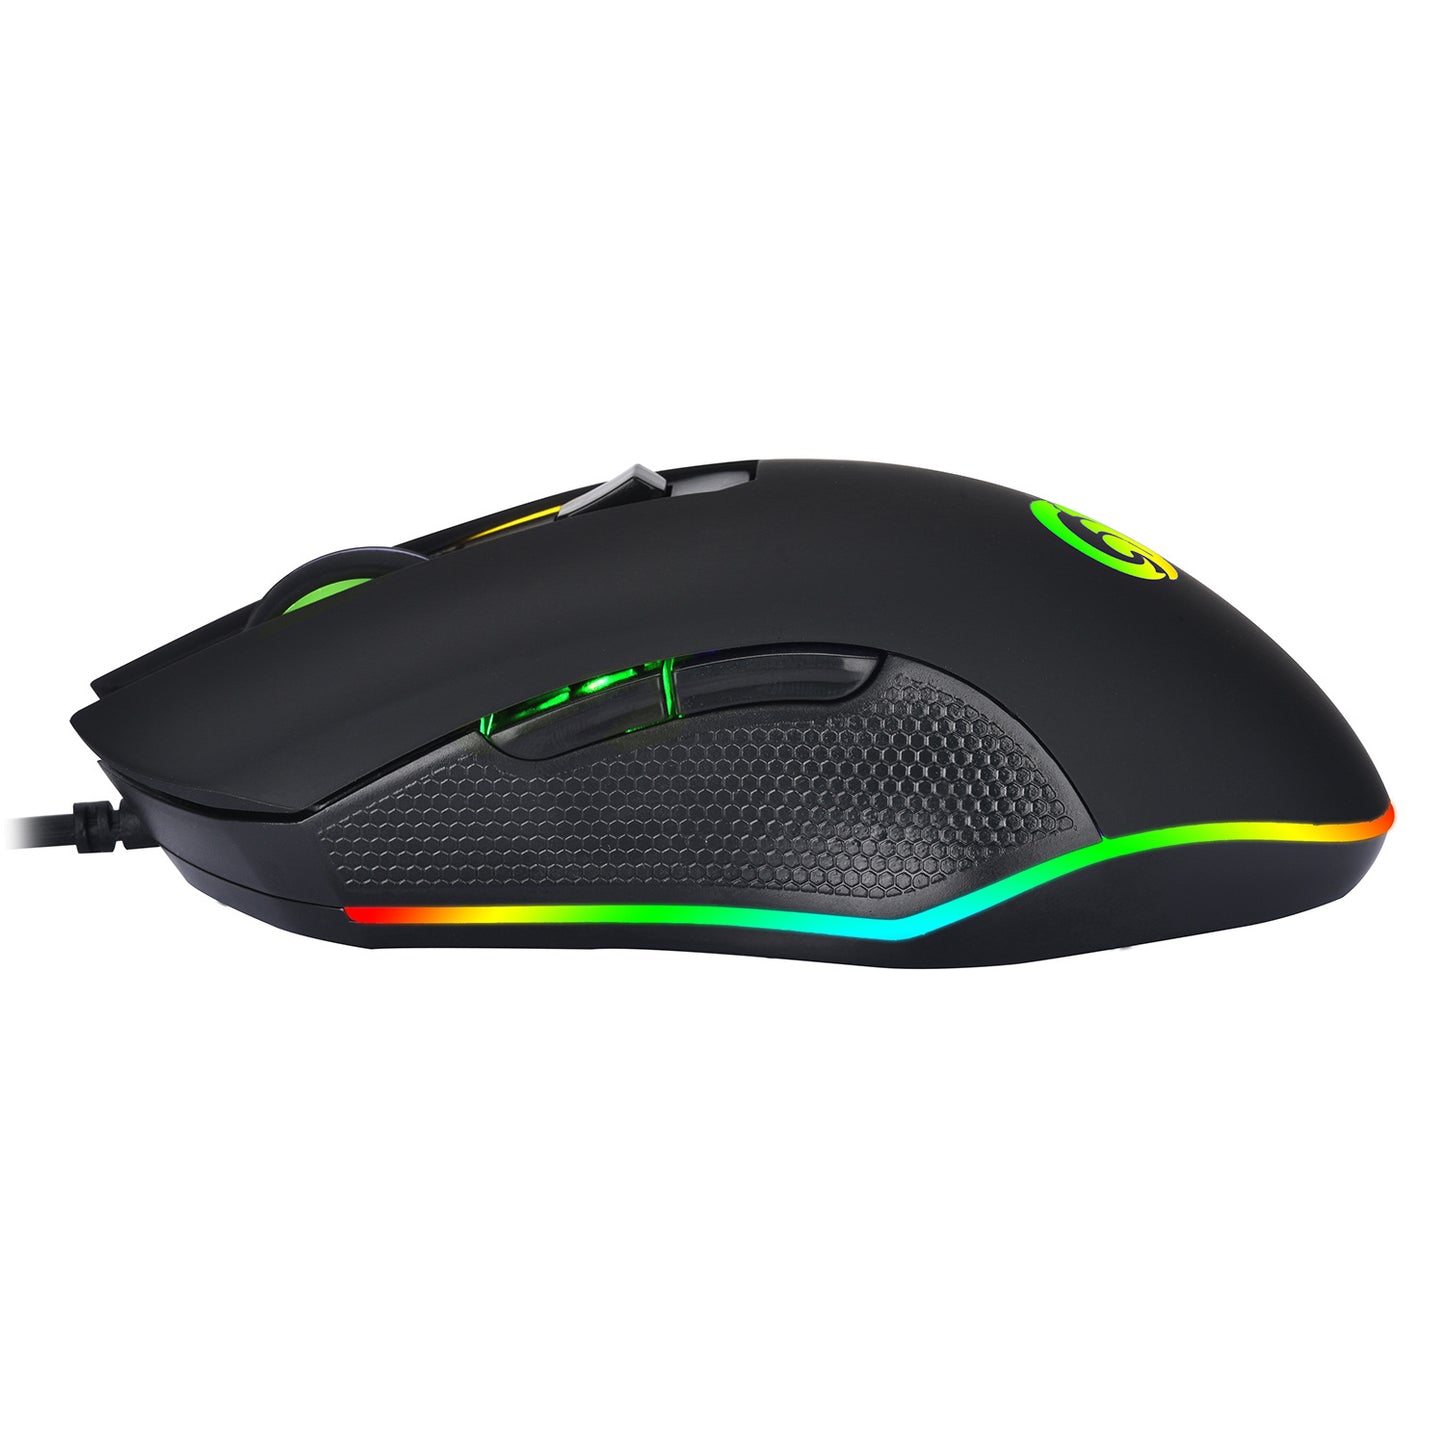 RGB Wired Gaming Mouse - Elevate you gaming experience affordably